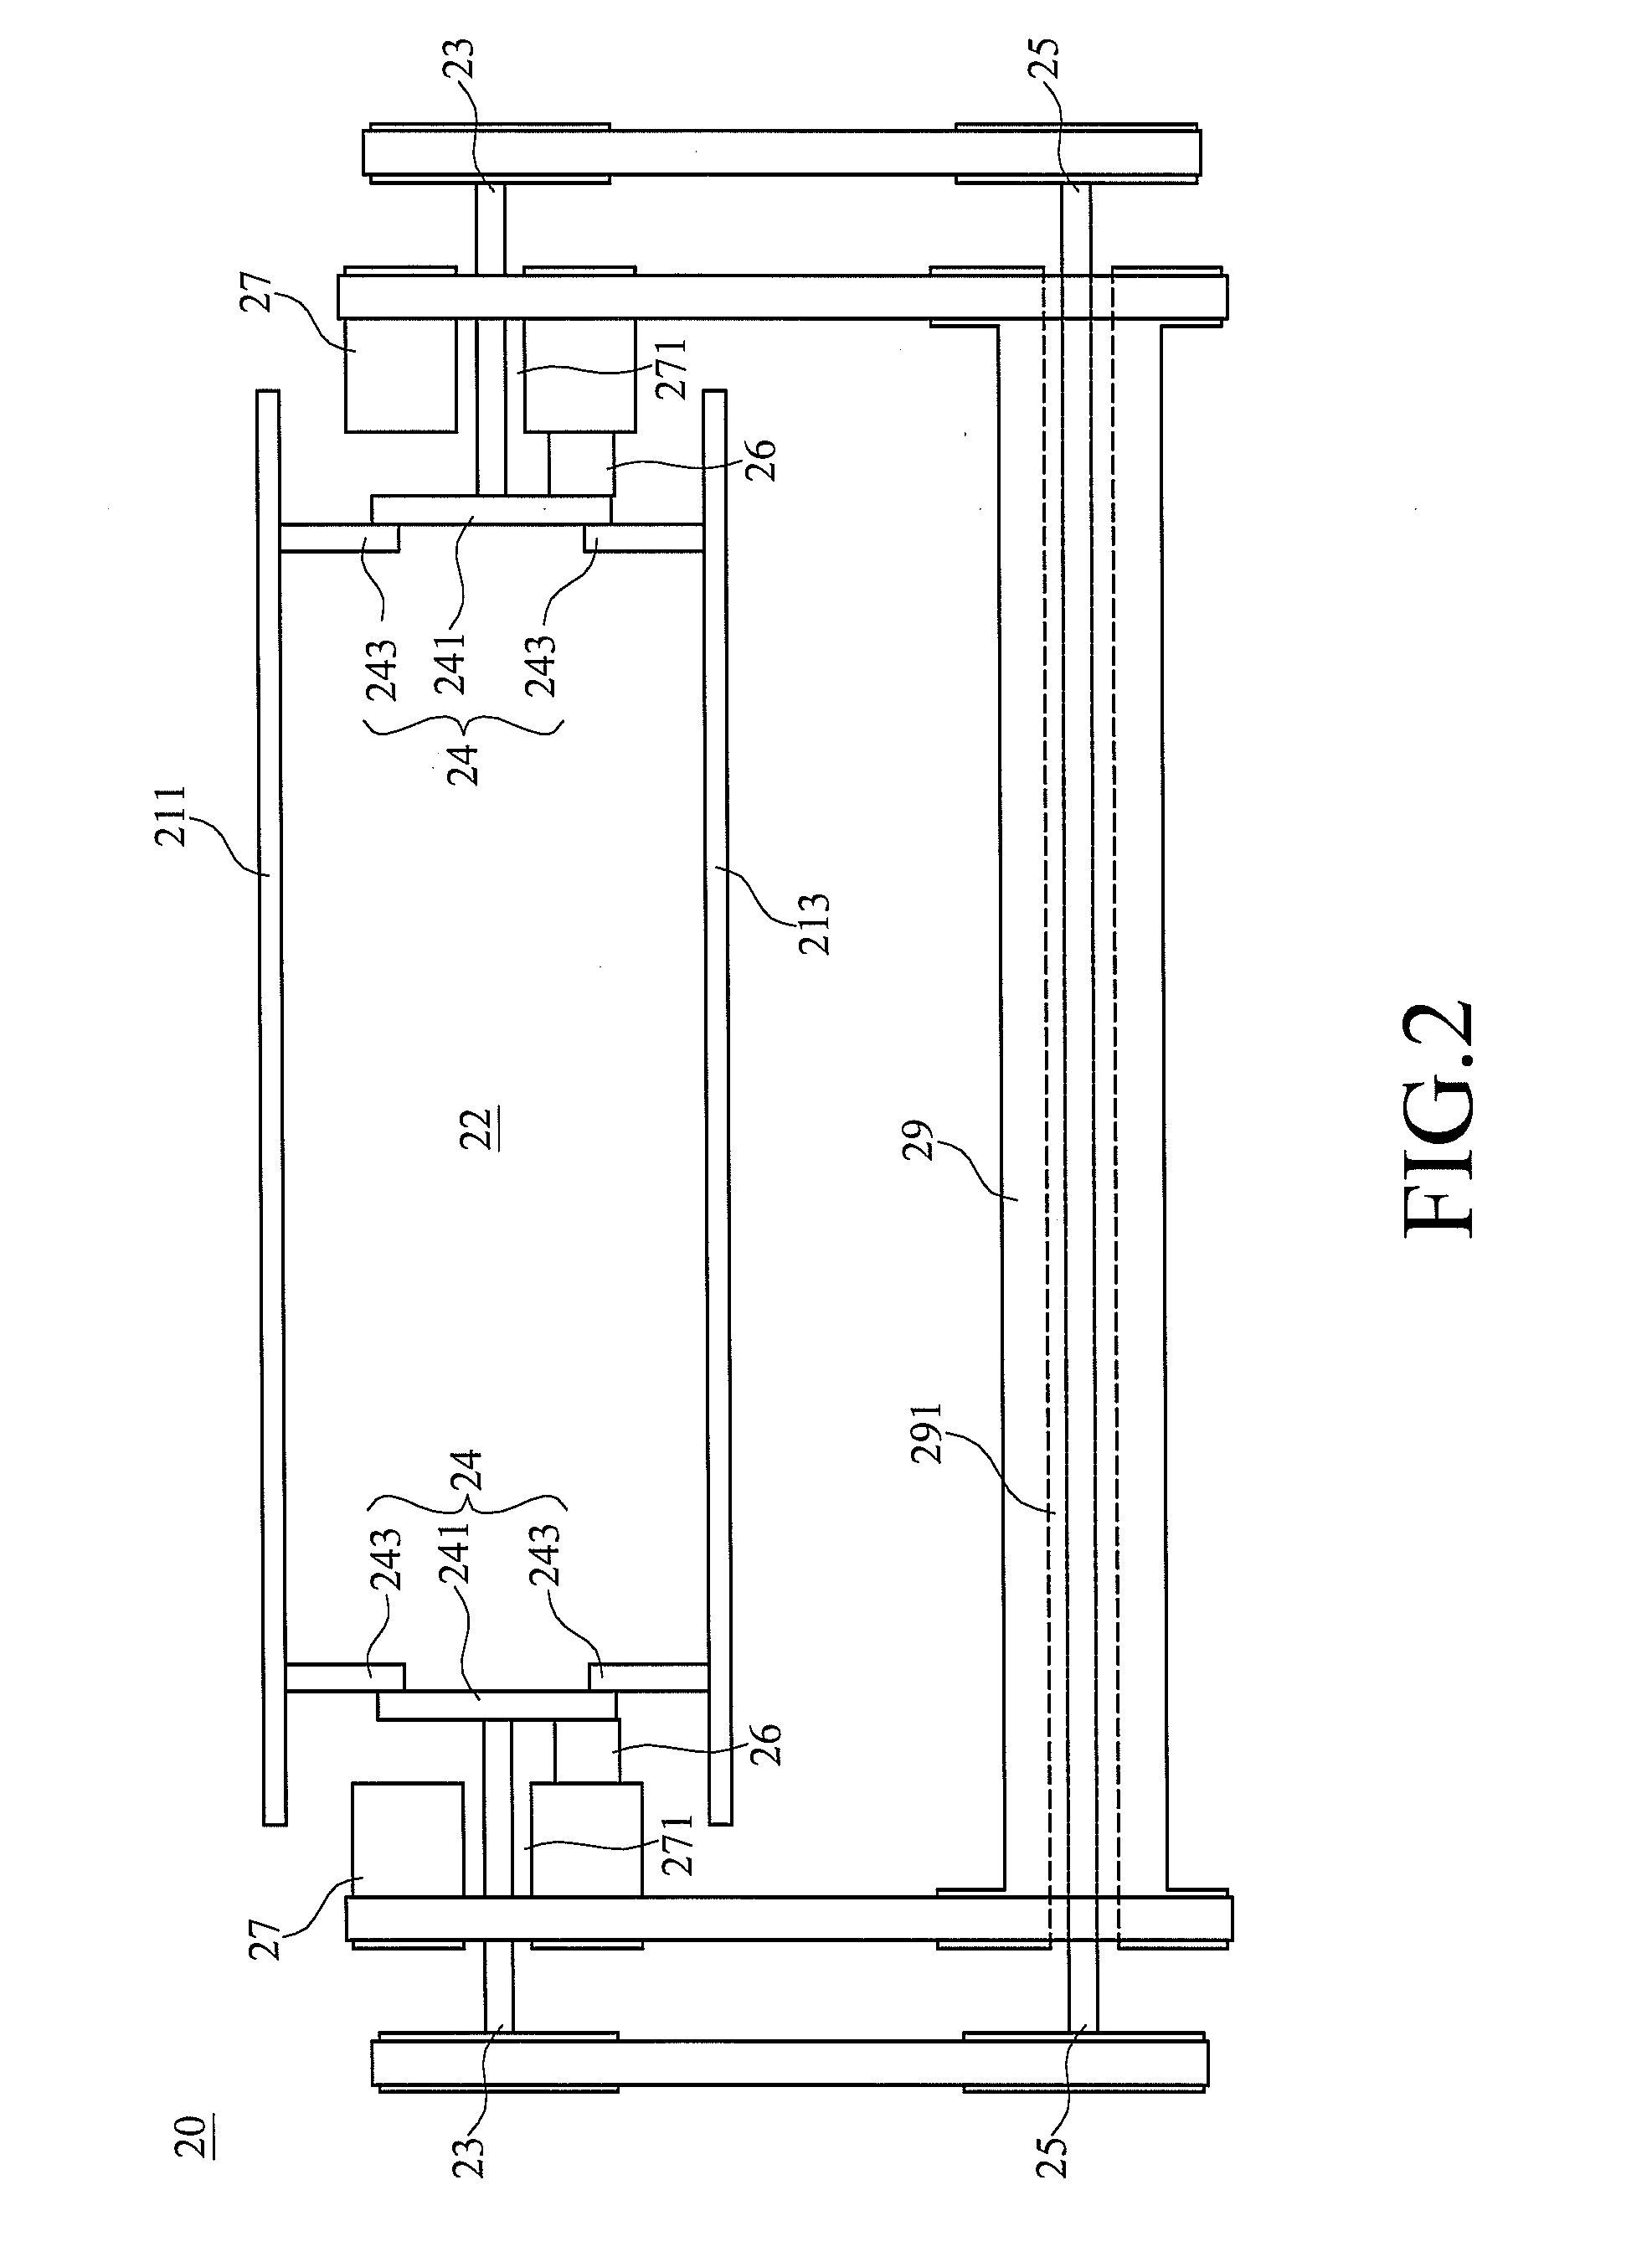 Device for clamping and rotating the object